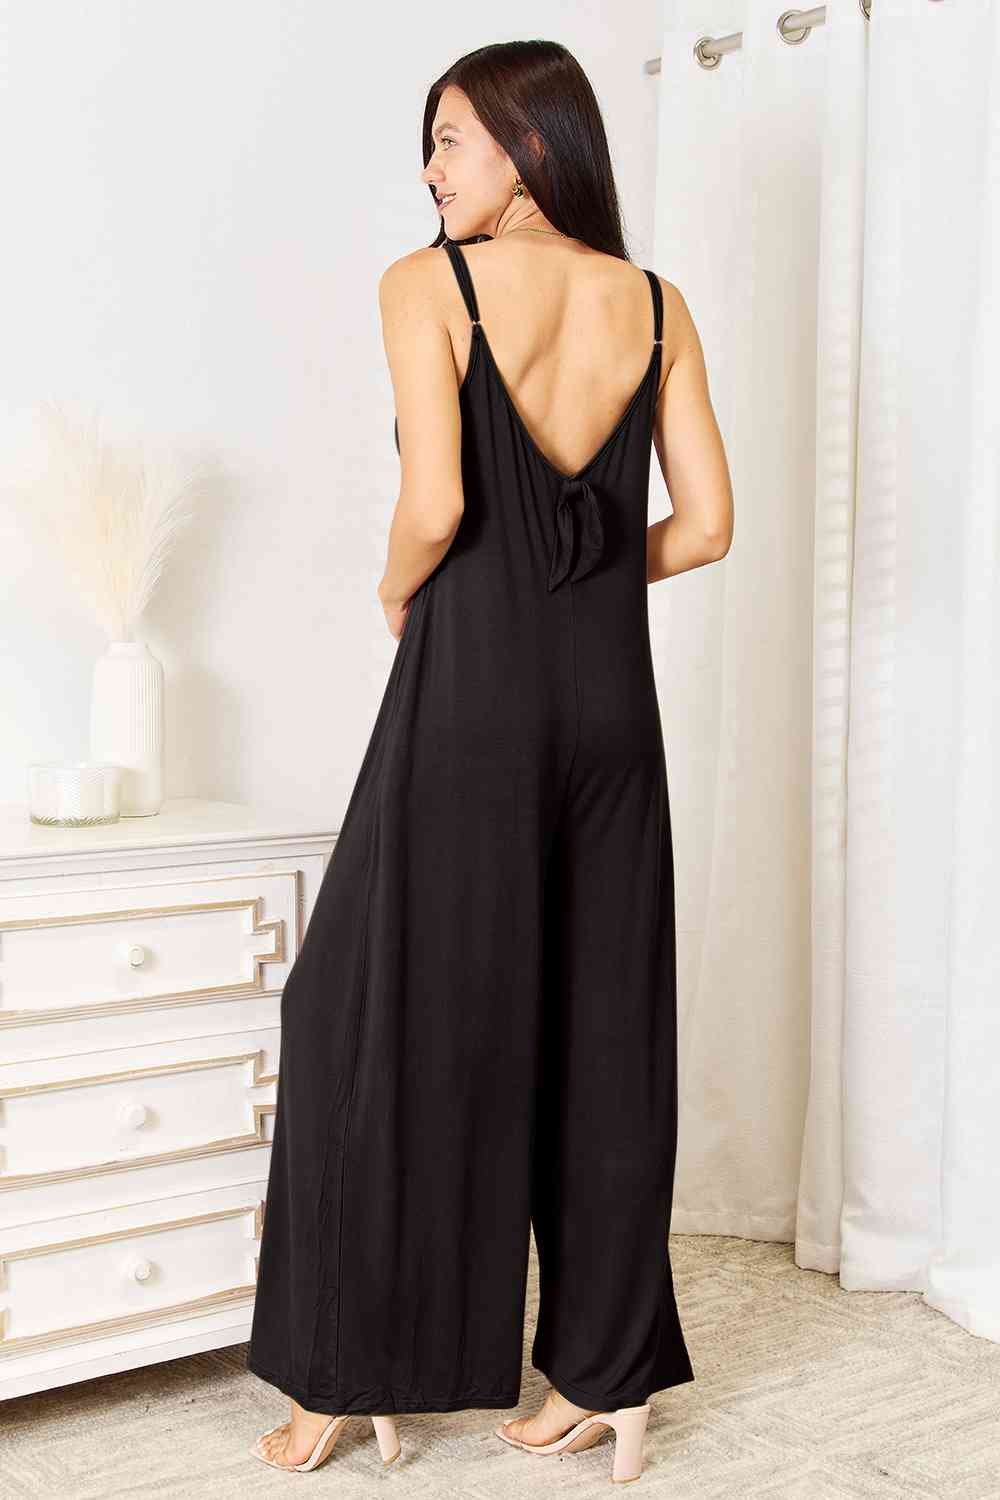 Double Take Full Size Soft Rayon Spaghetti Strap Tied Wide Leg Jumpsuits